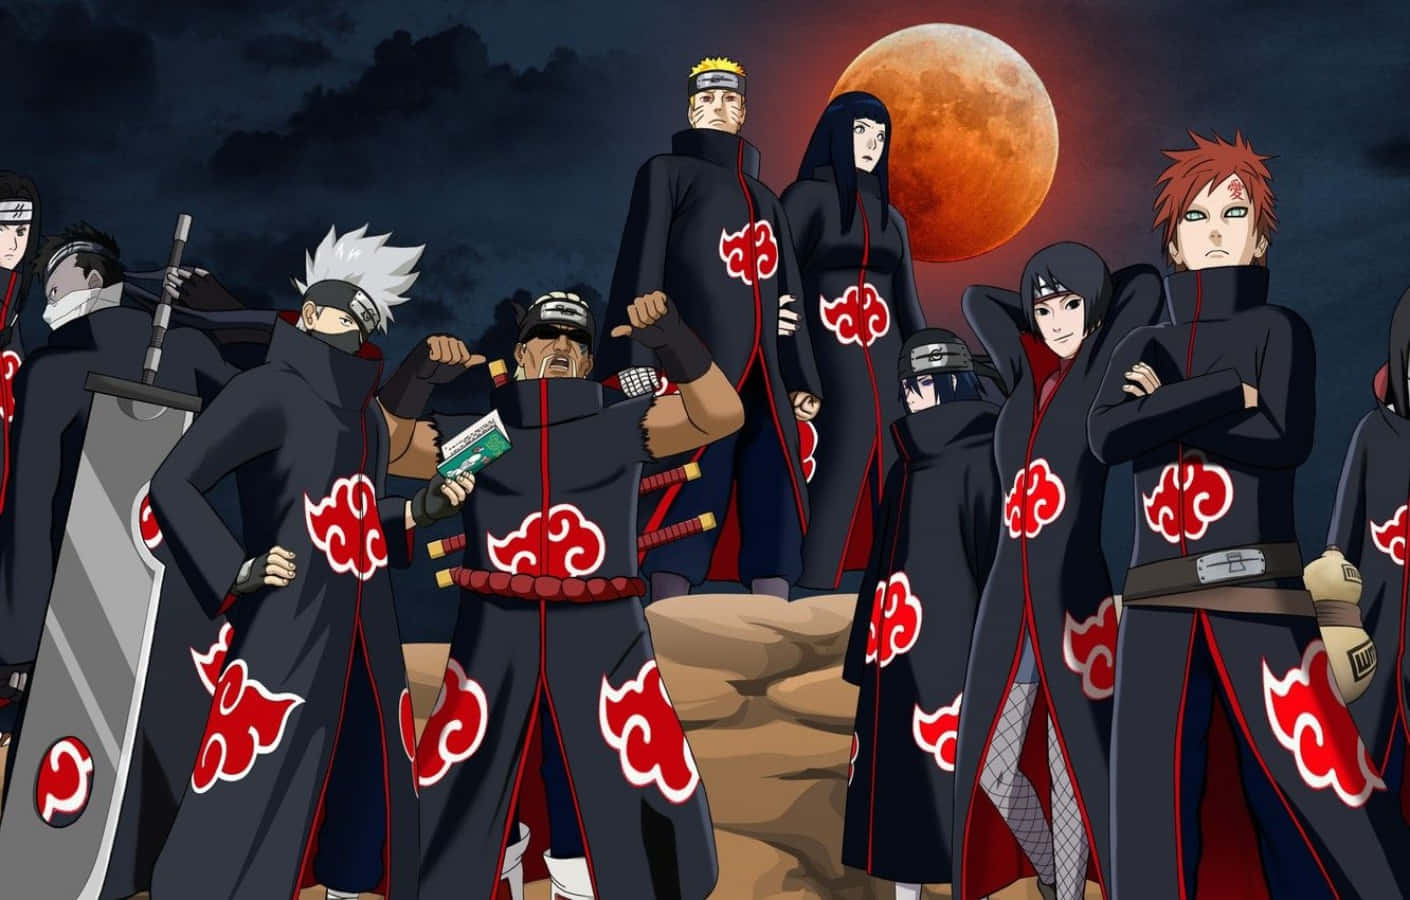 Feel the power of the ninja in the classic PS4 game, Naruto Wallpaper